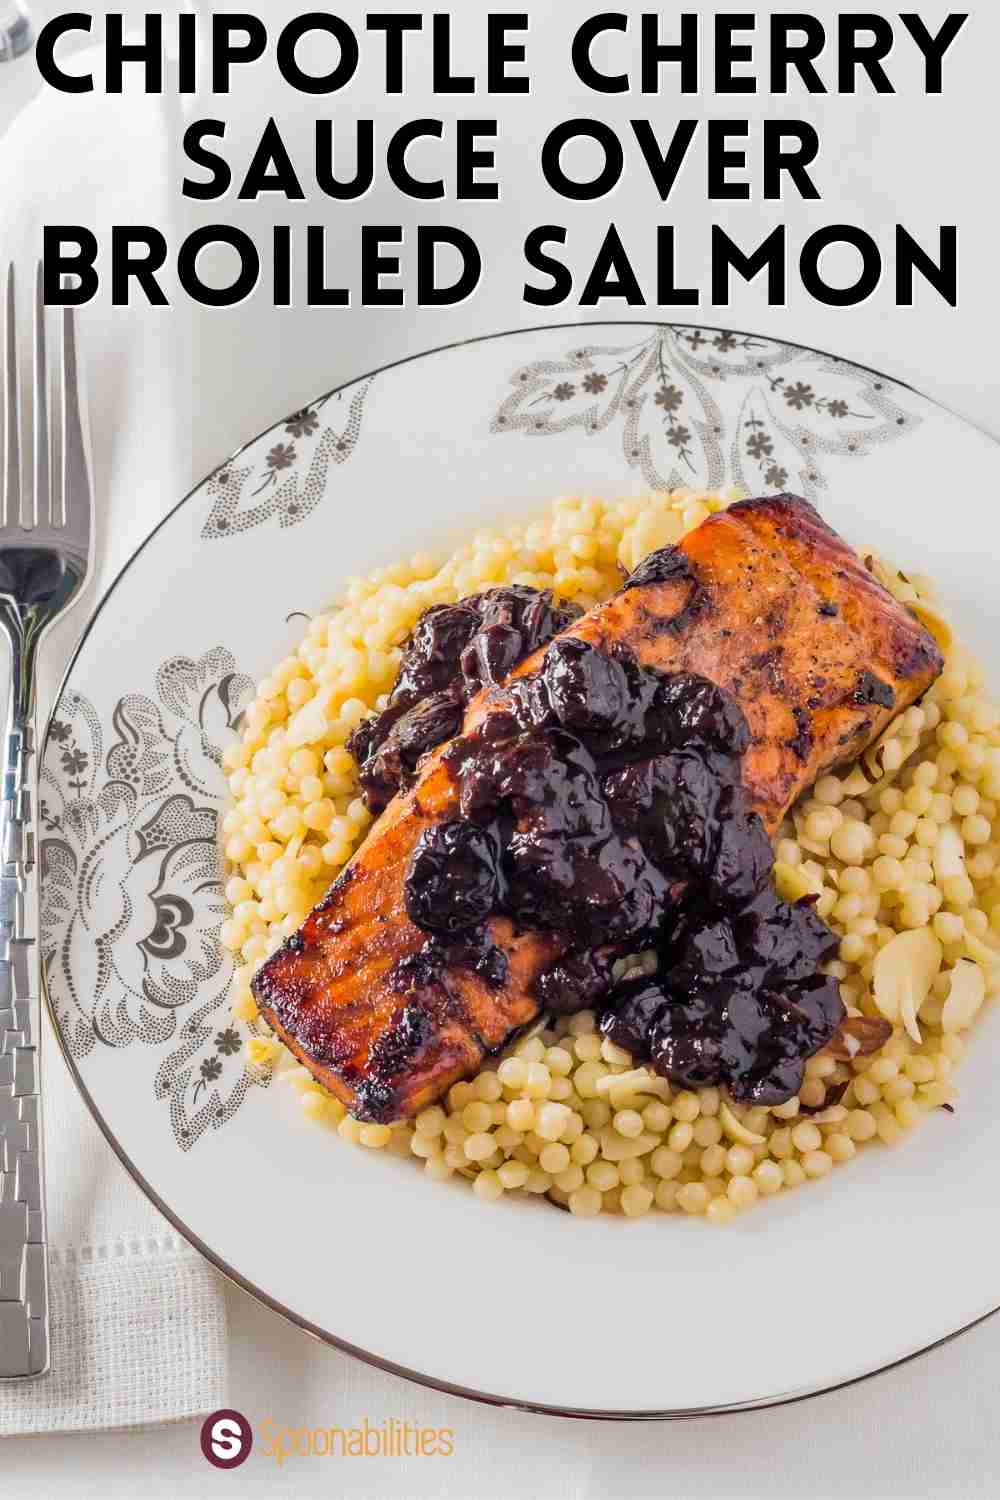 Chipotle Cherry Sauce over Broiled Salmon